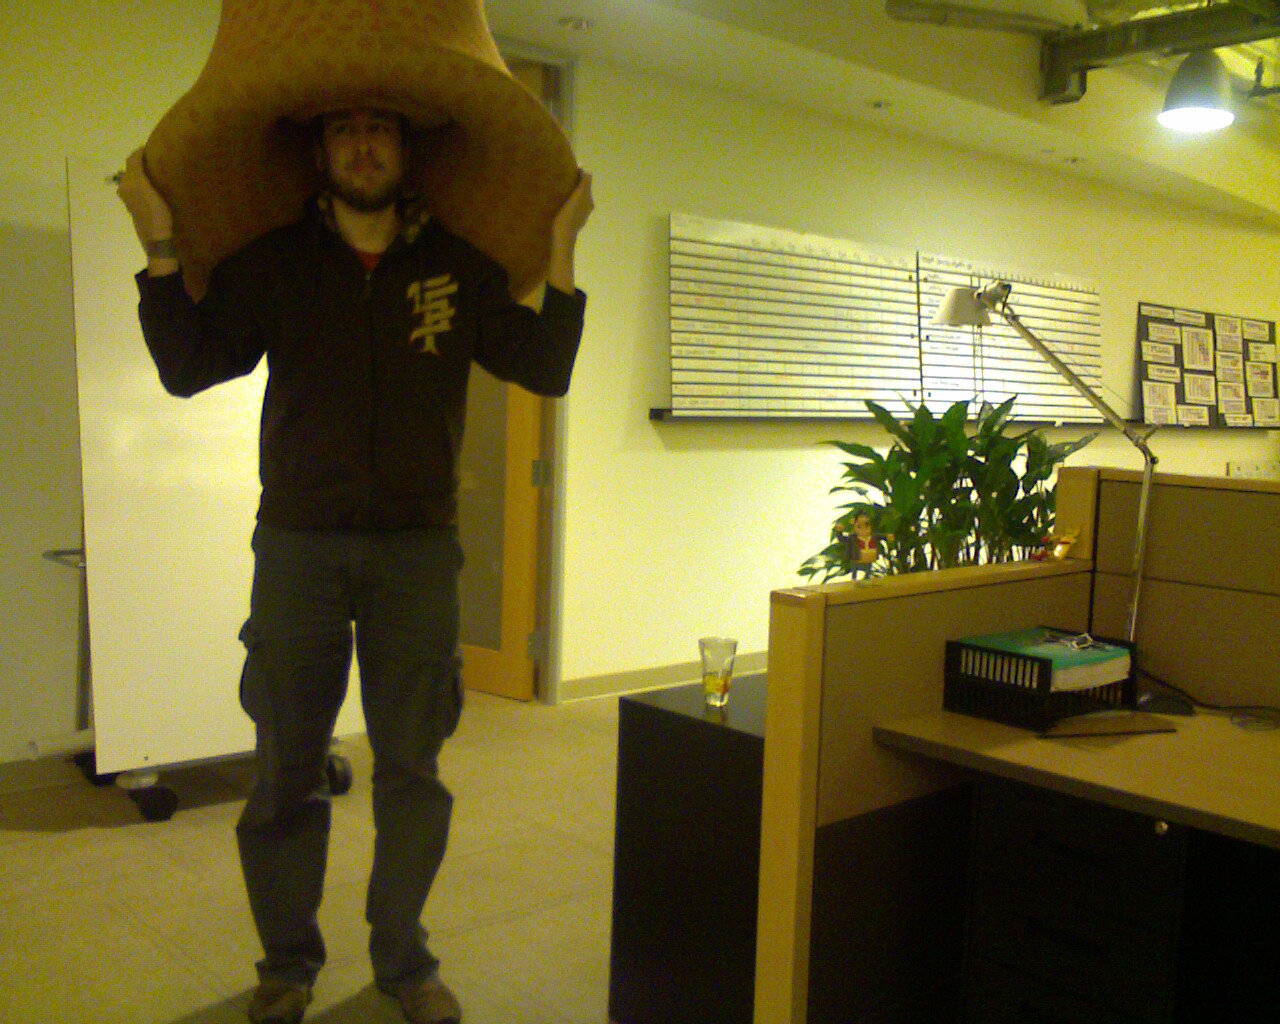 a man carrying a big sack on his head